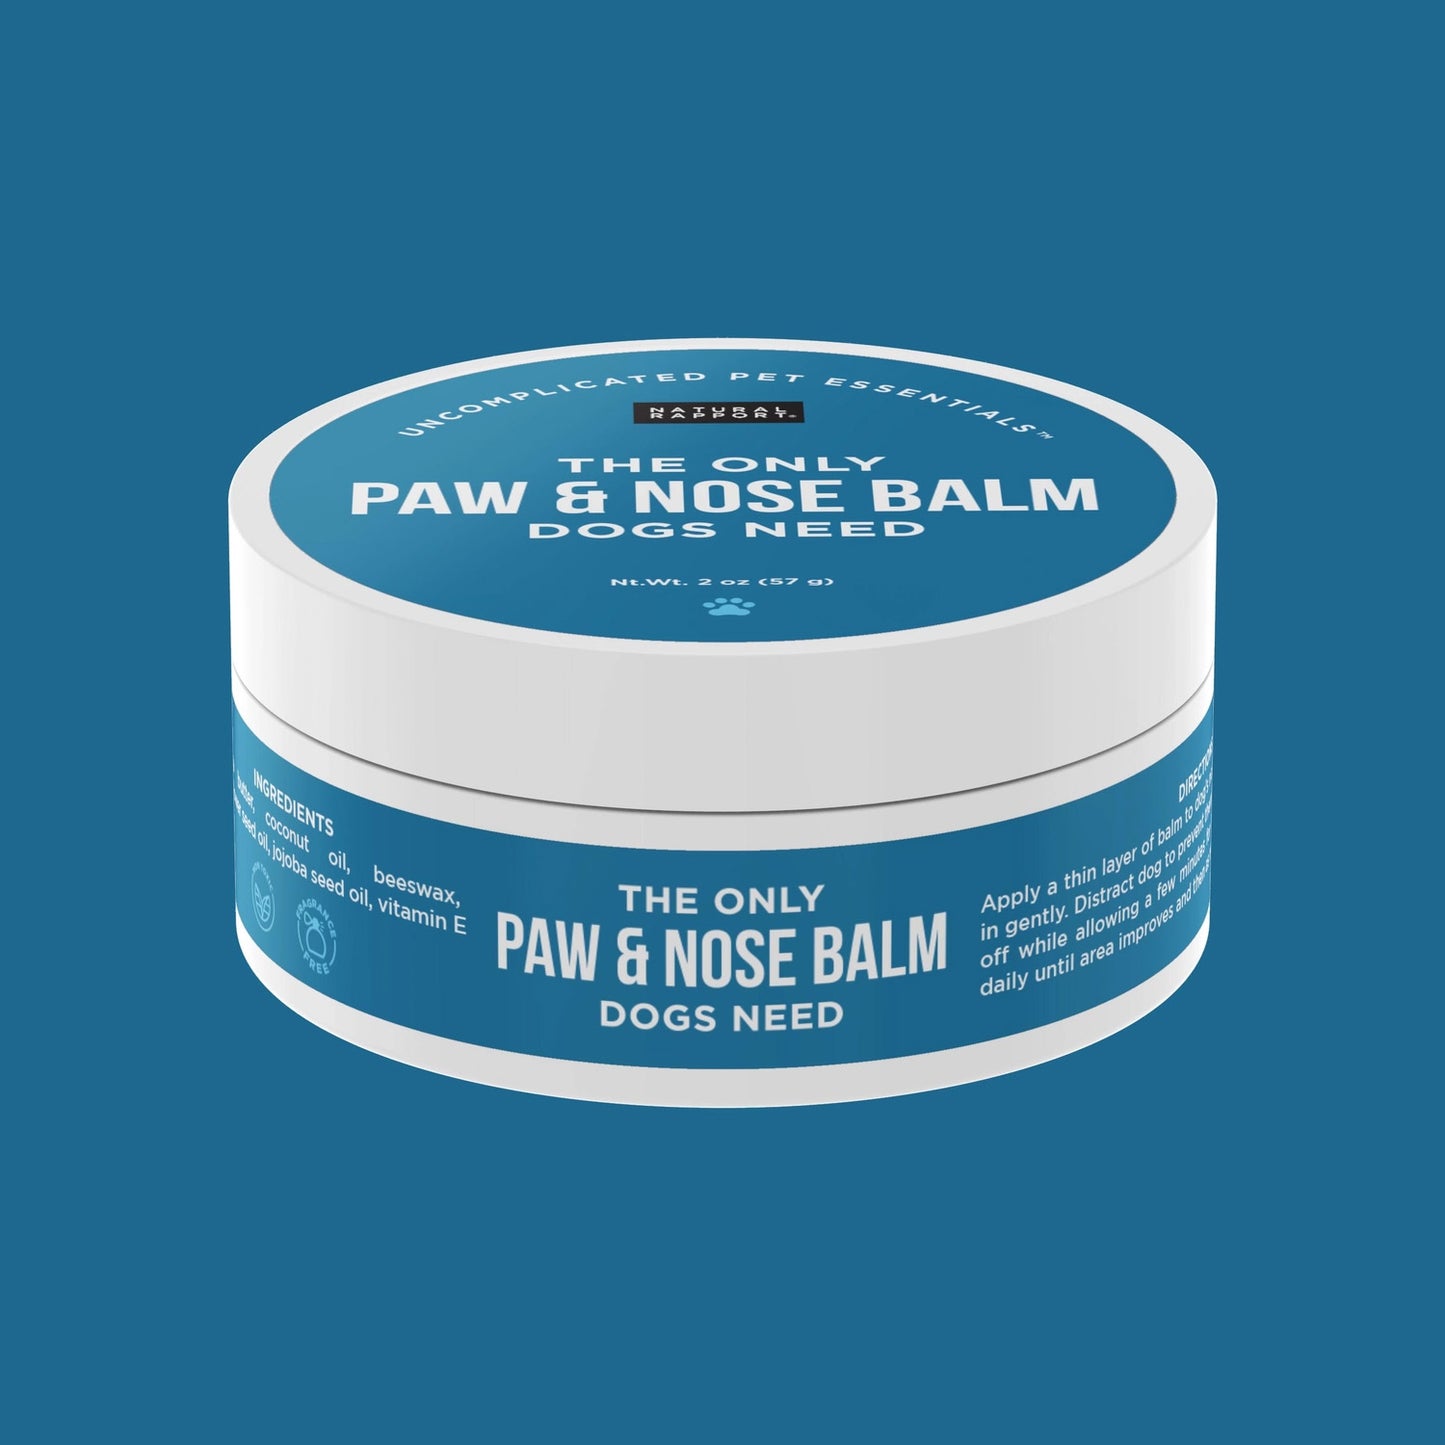 The Only Paw and Nose Balm Dogs Need